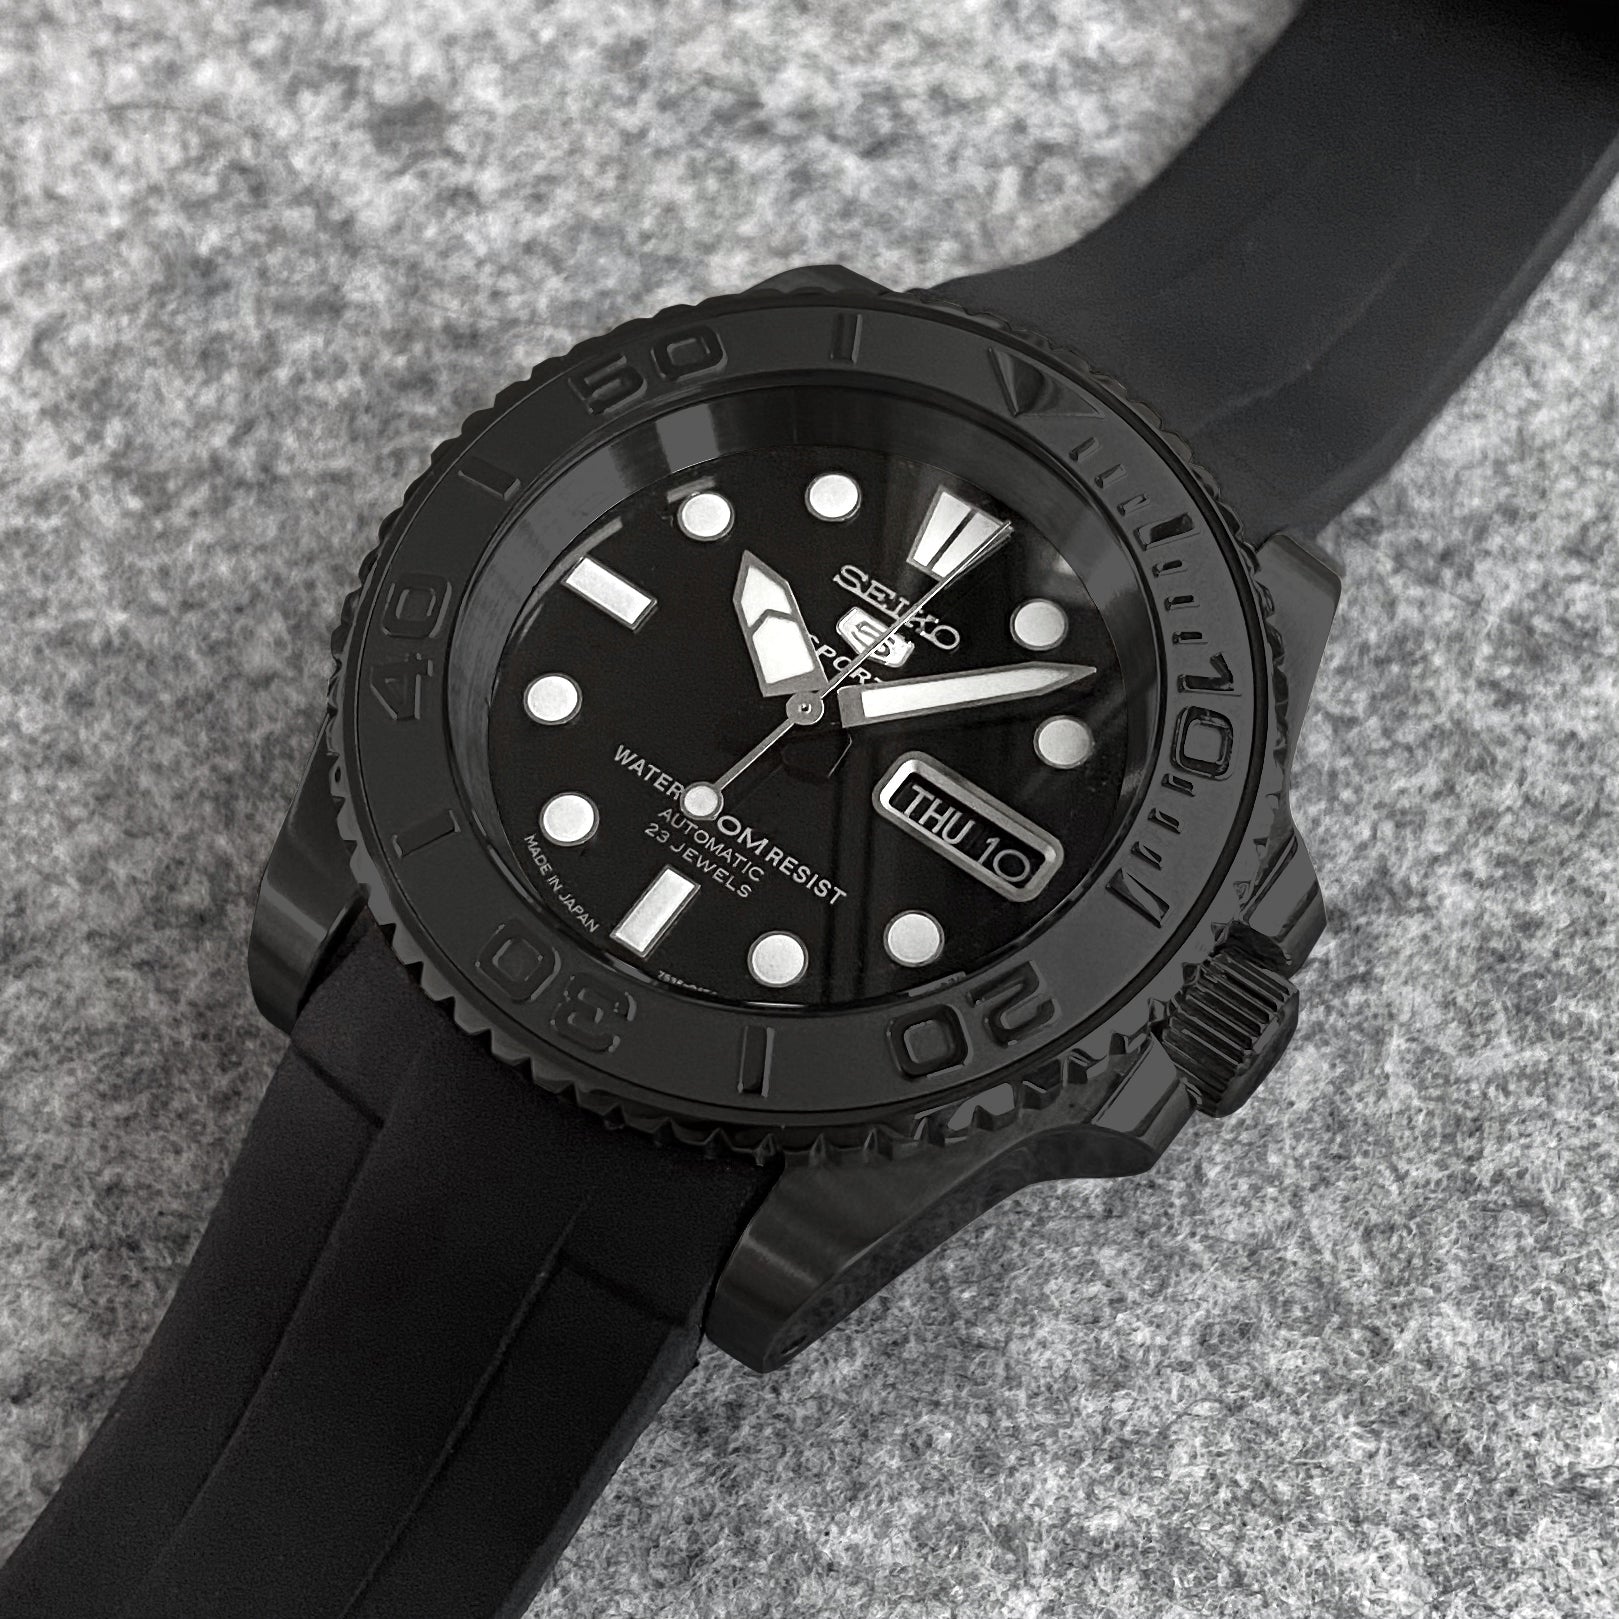 Case - SKX007 Sub - Polished PVD Black (With Case Back) - DLW WATCHES